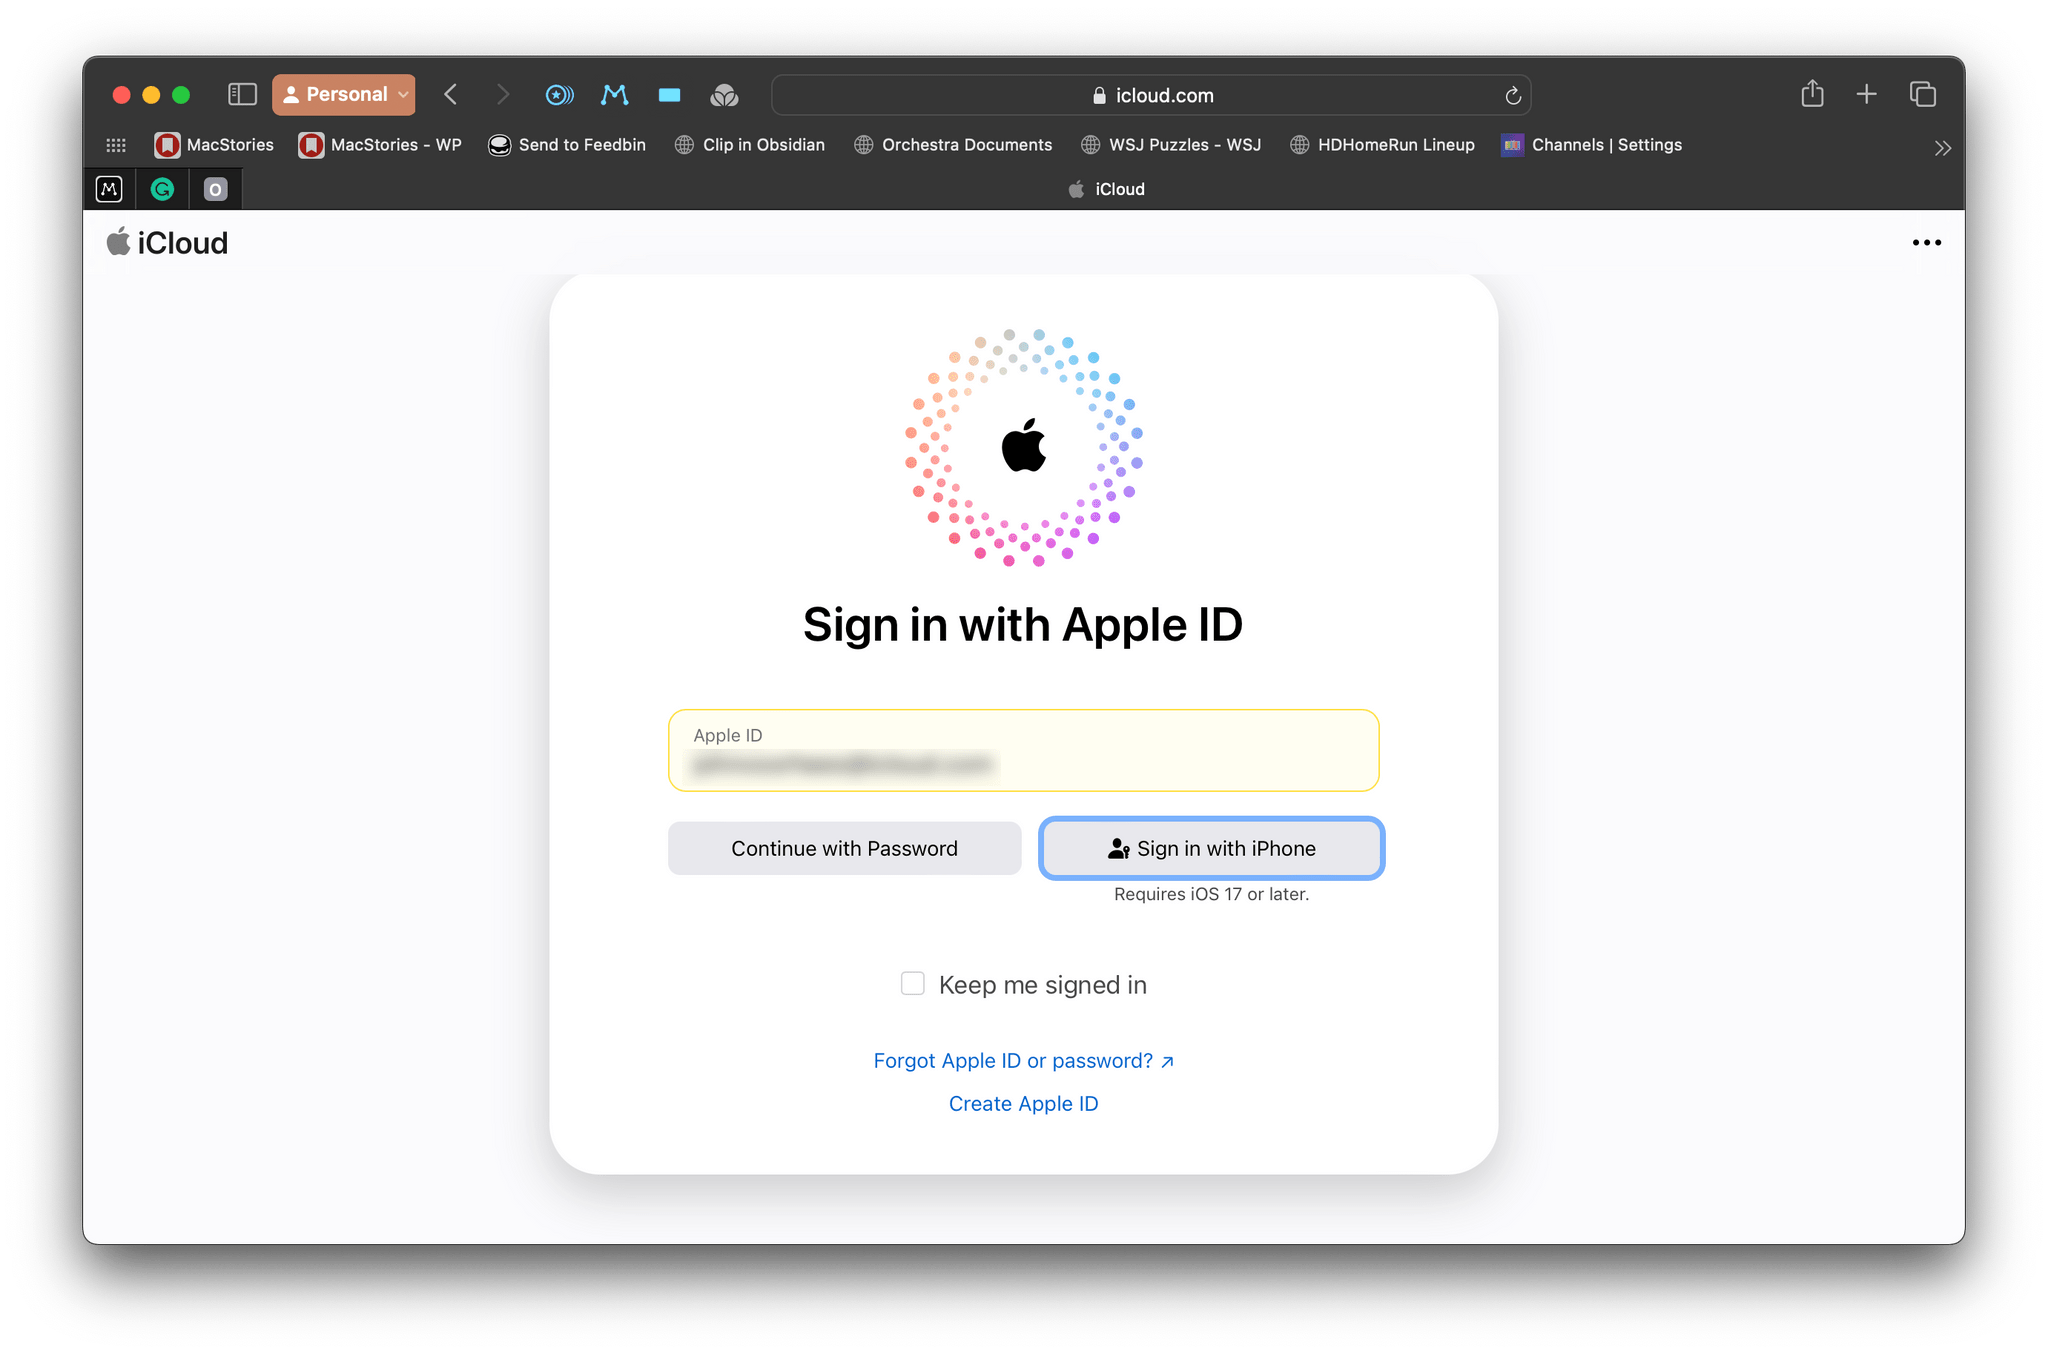 The latest OSes automatically generate a passkey for your Apple ID.